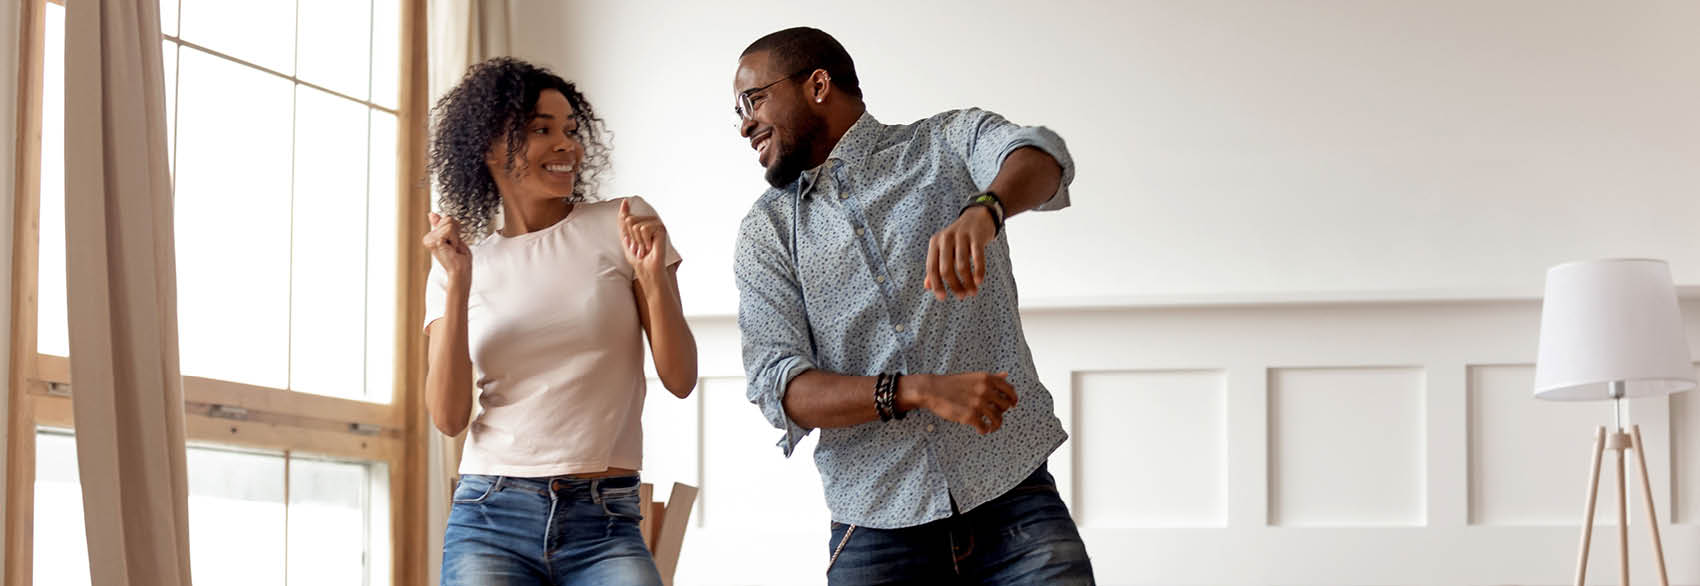 Two happy people dancing at home